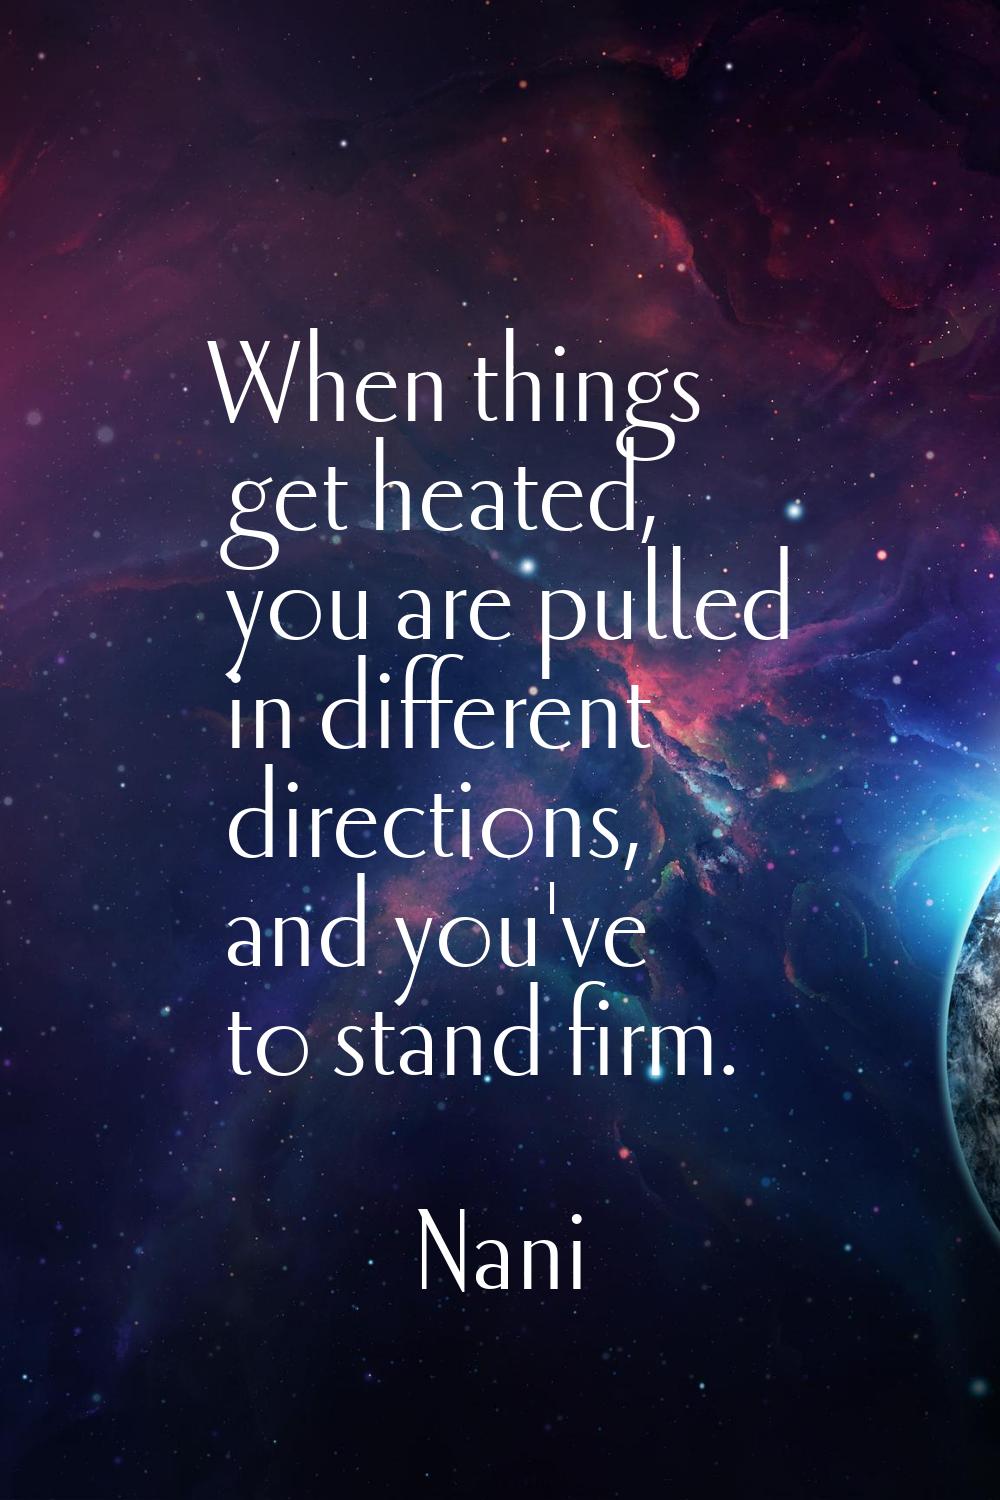 When things get heated, you are pulled in different directions, and you've to stand firm.